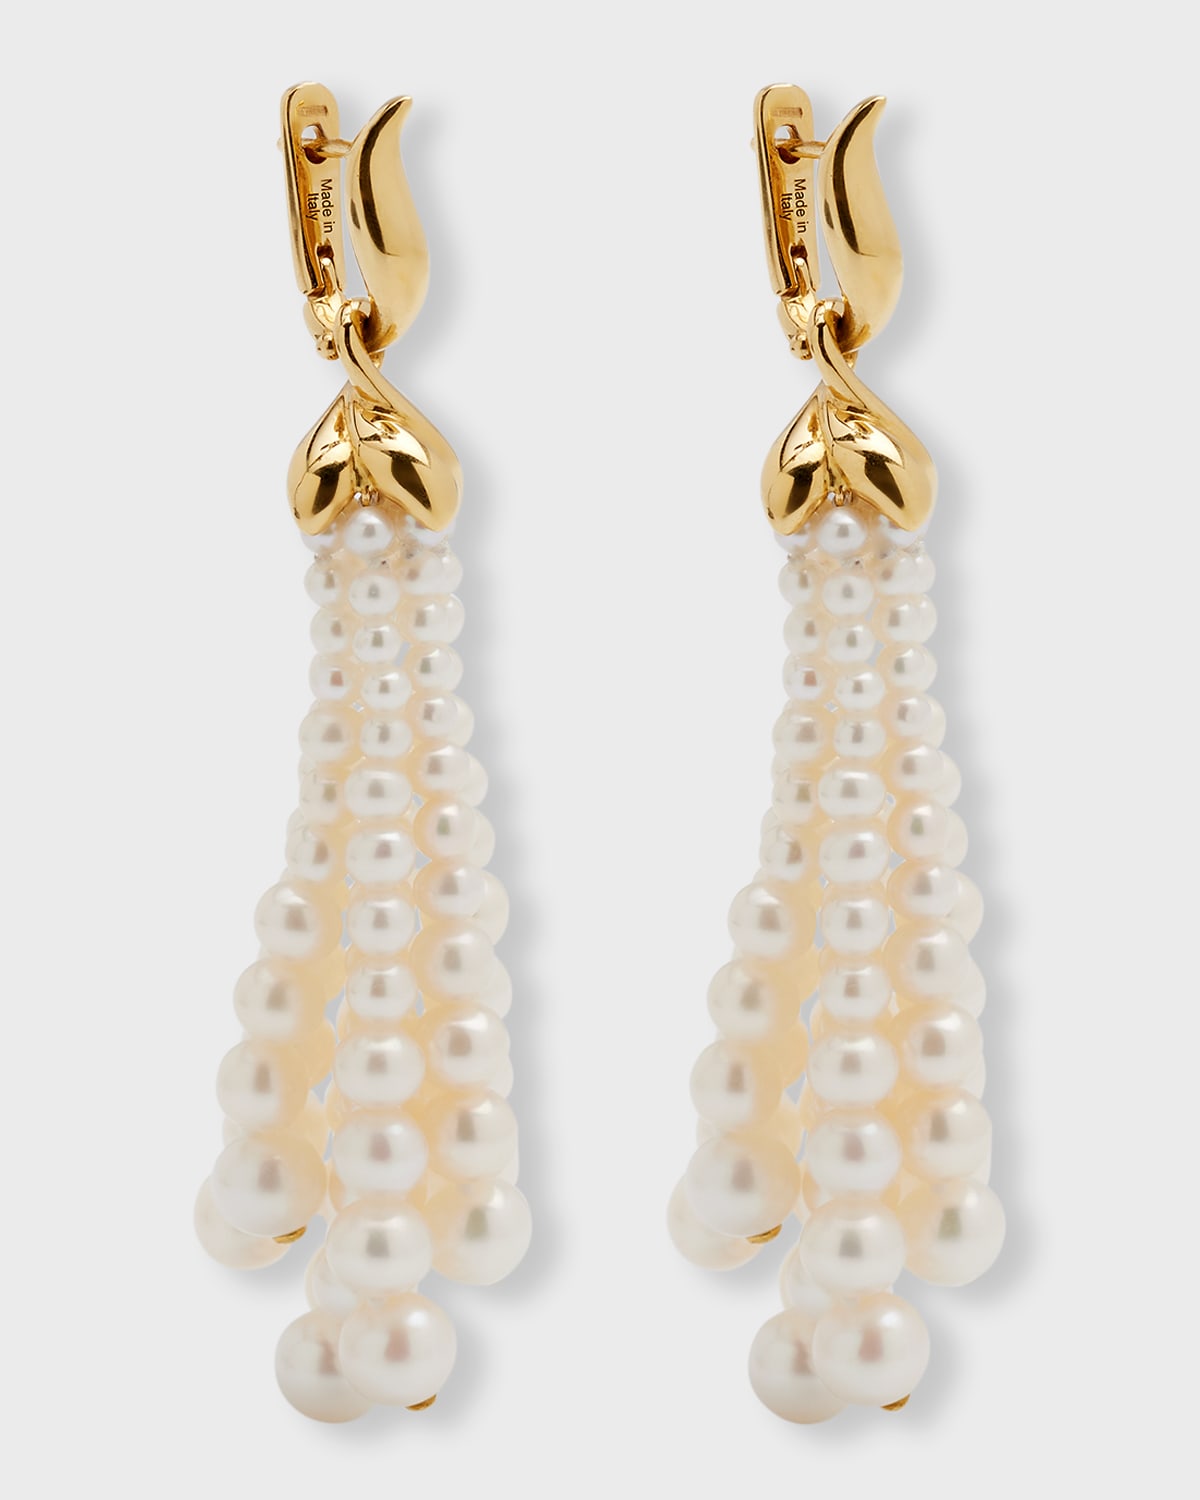 18K Yellow Gold Earrings with Freshwater Pearls, 2.5-7mm